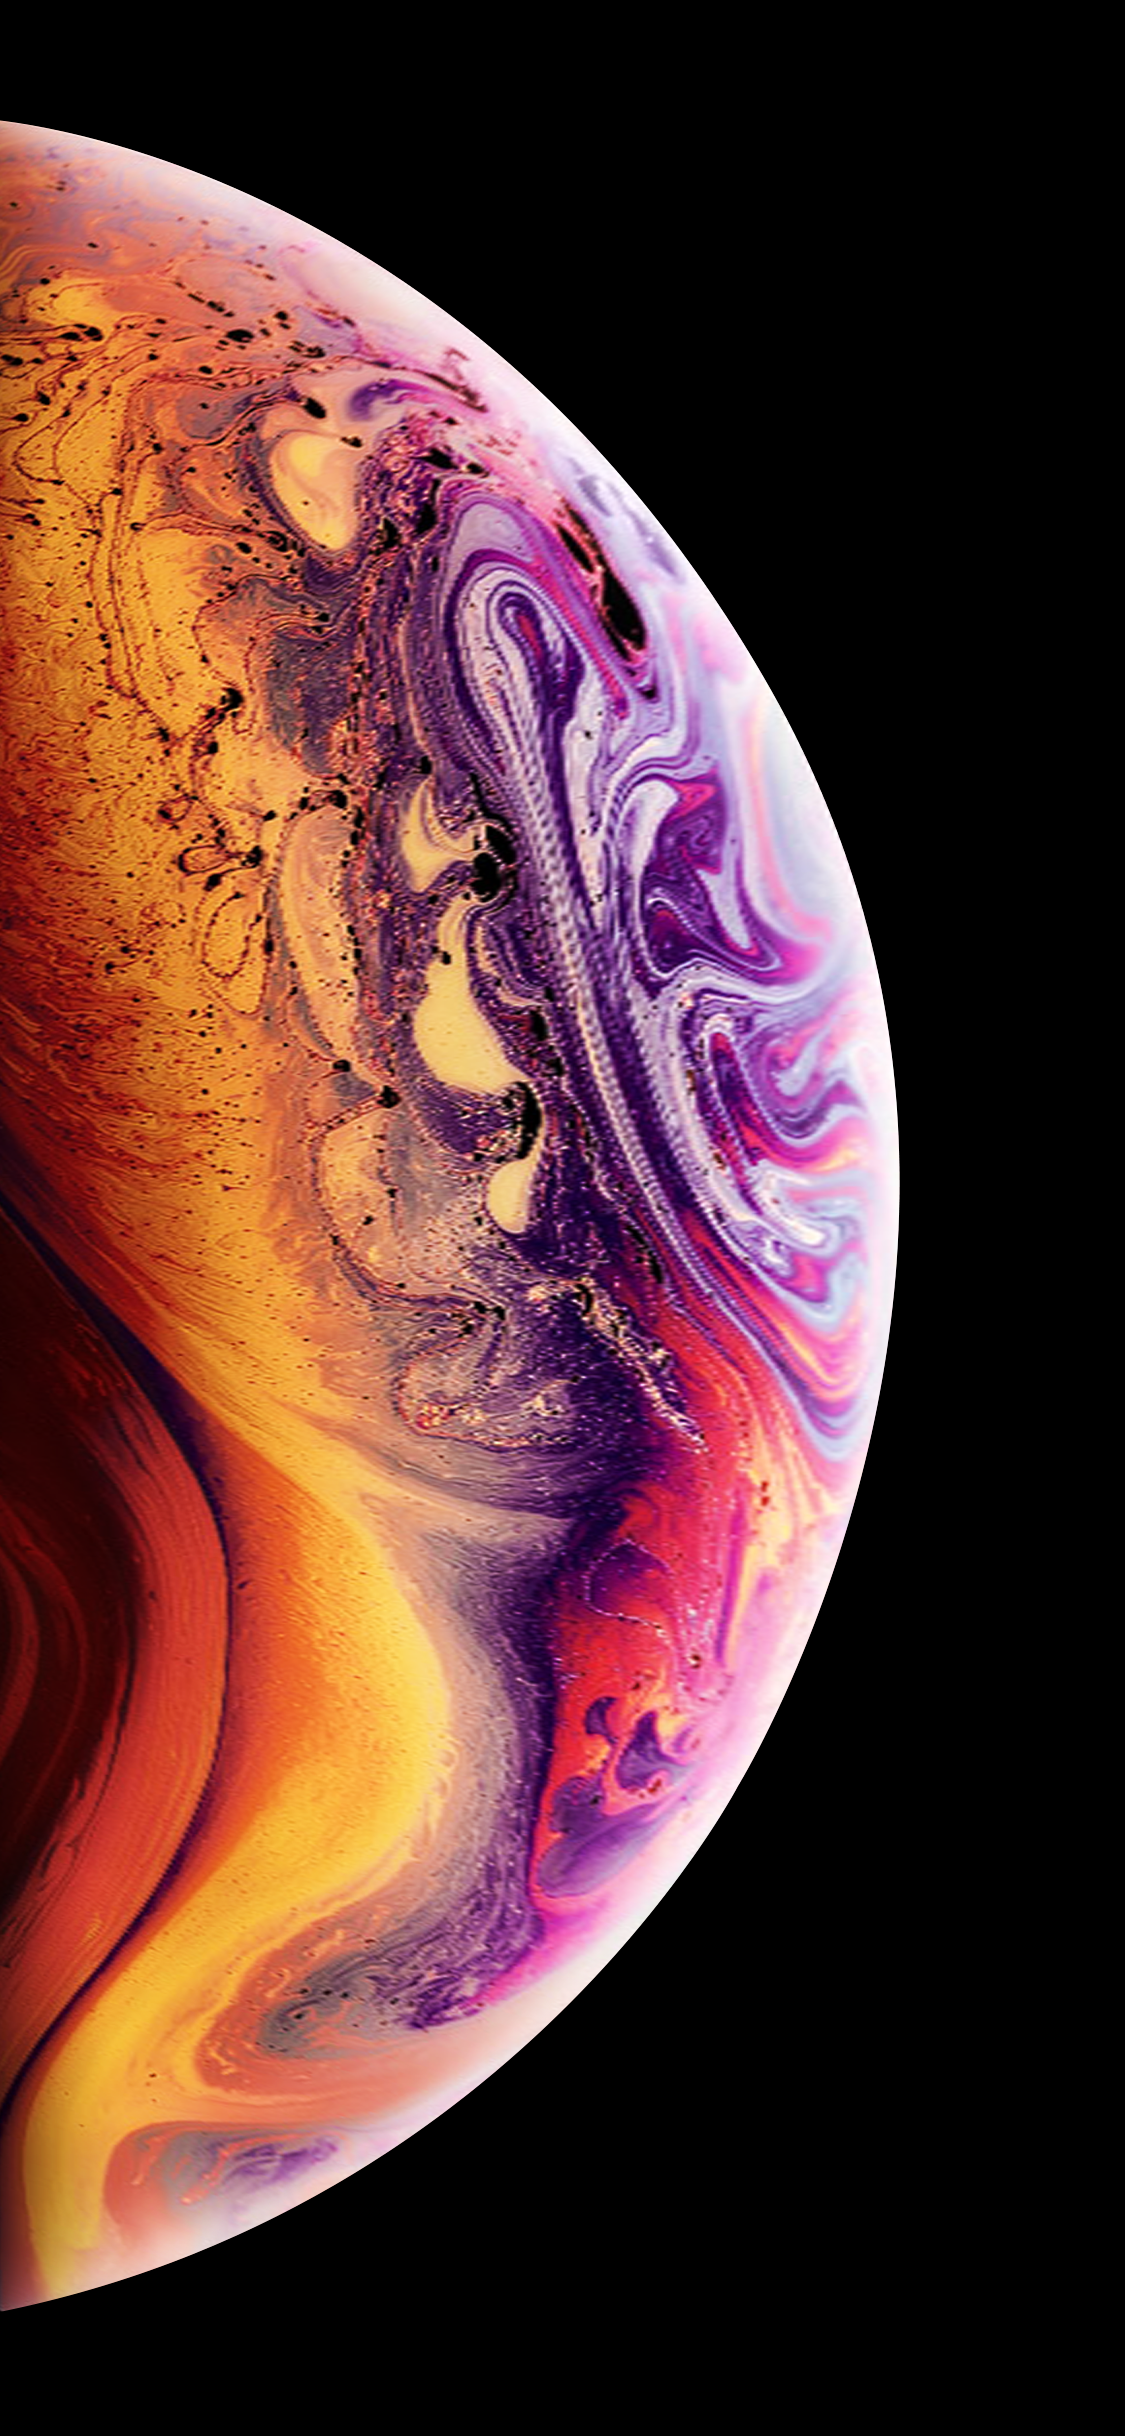 How To Download Stock Wallpaper Of iPhone XS